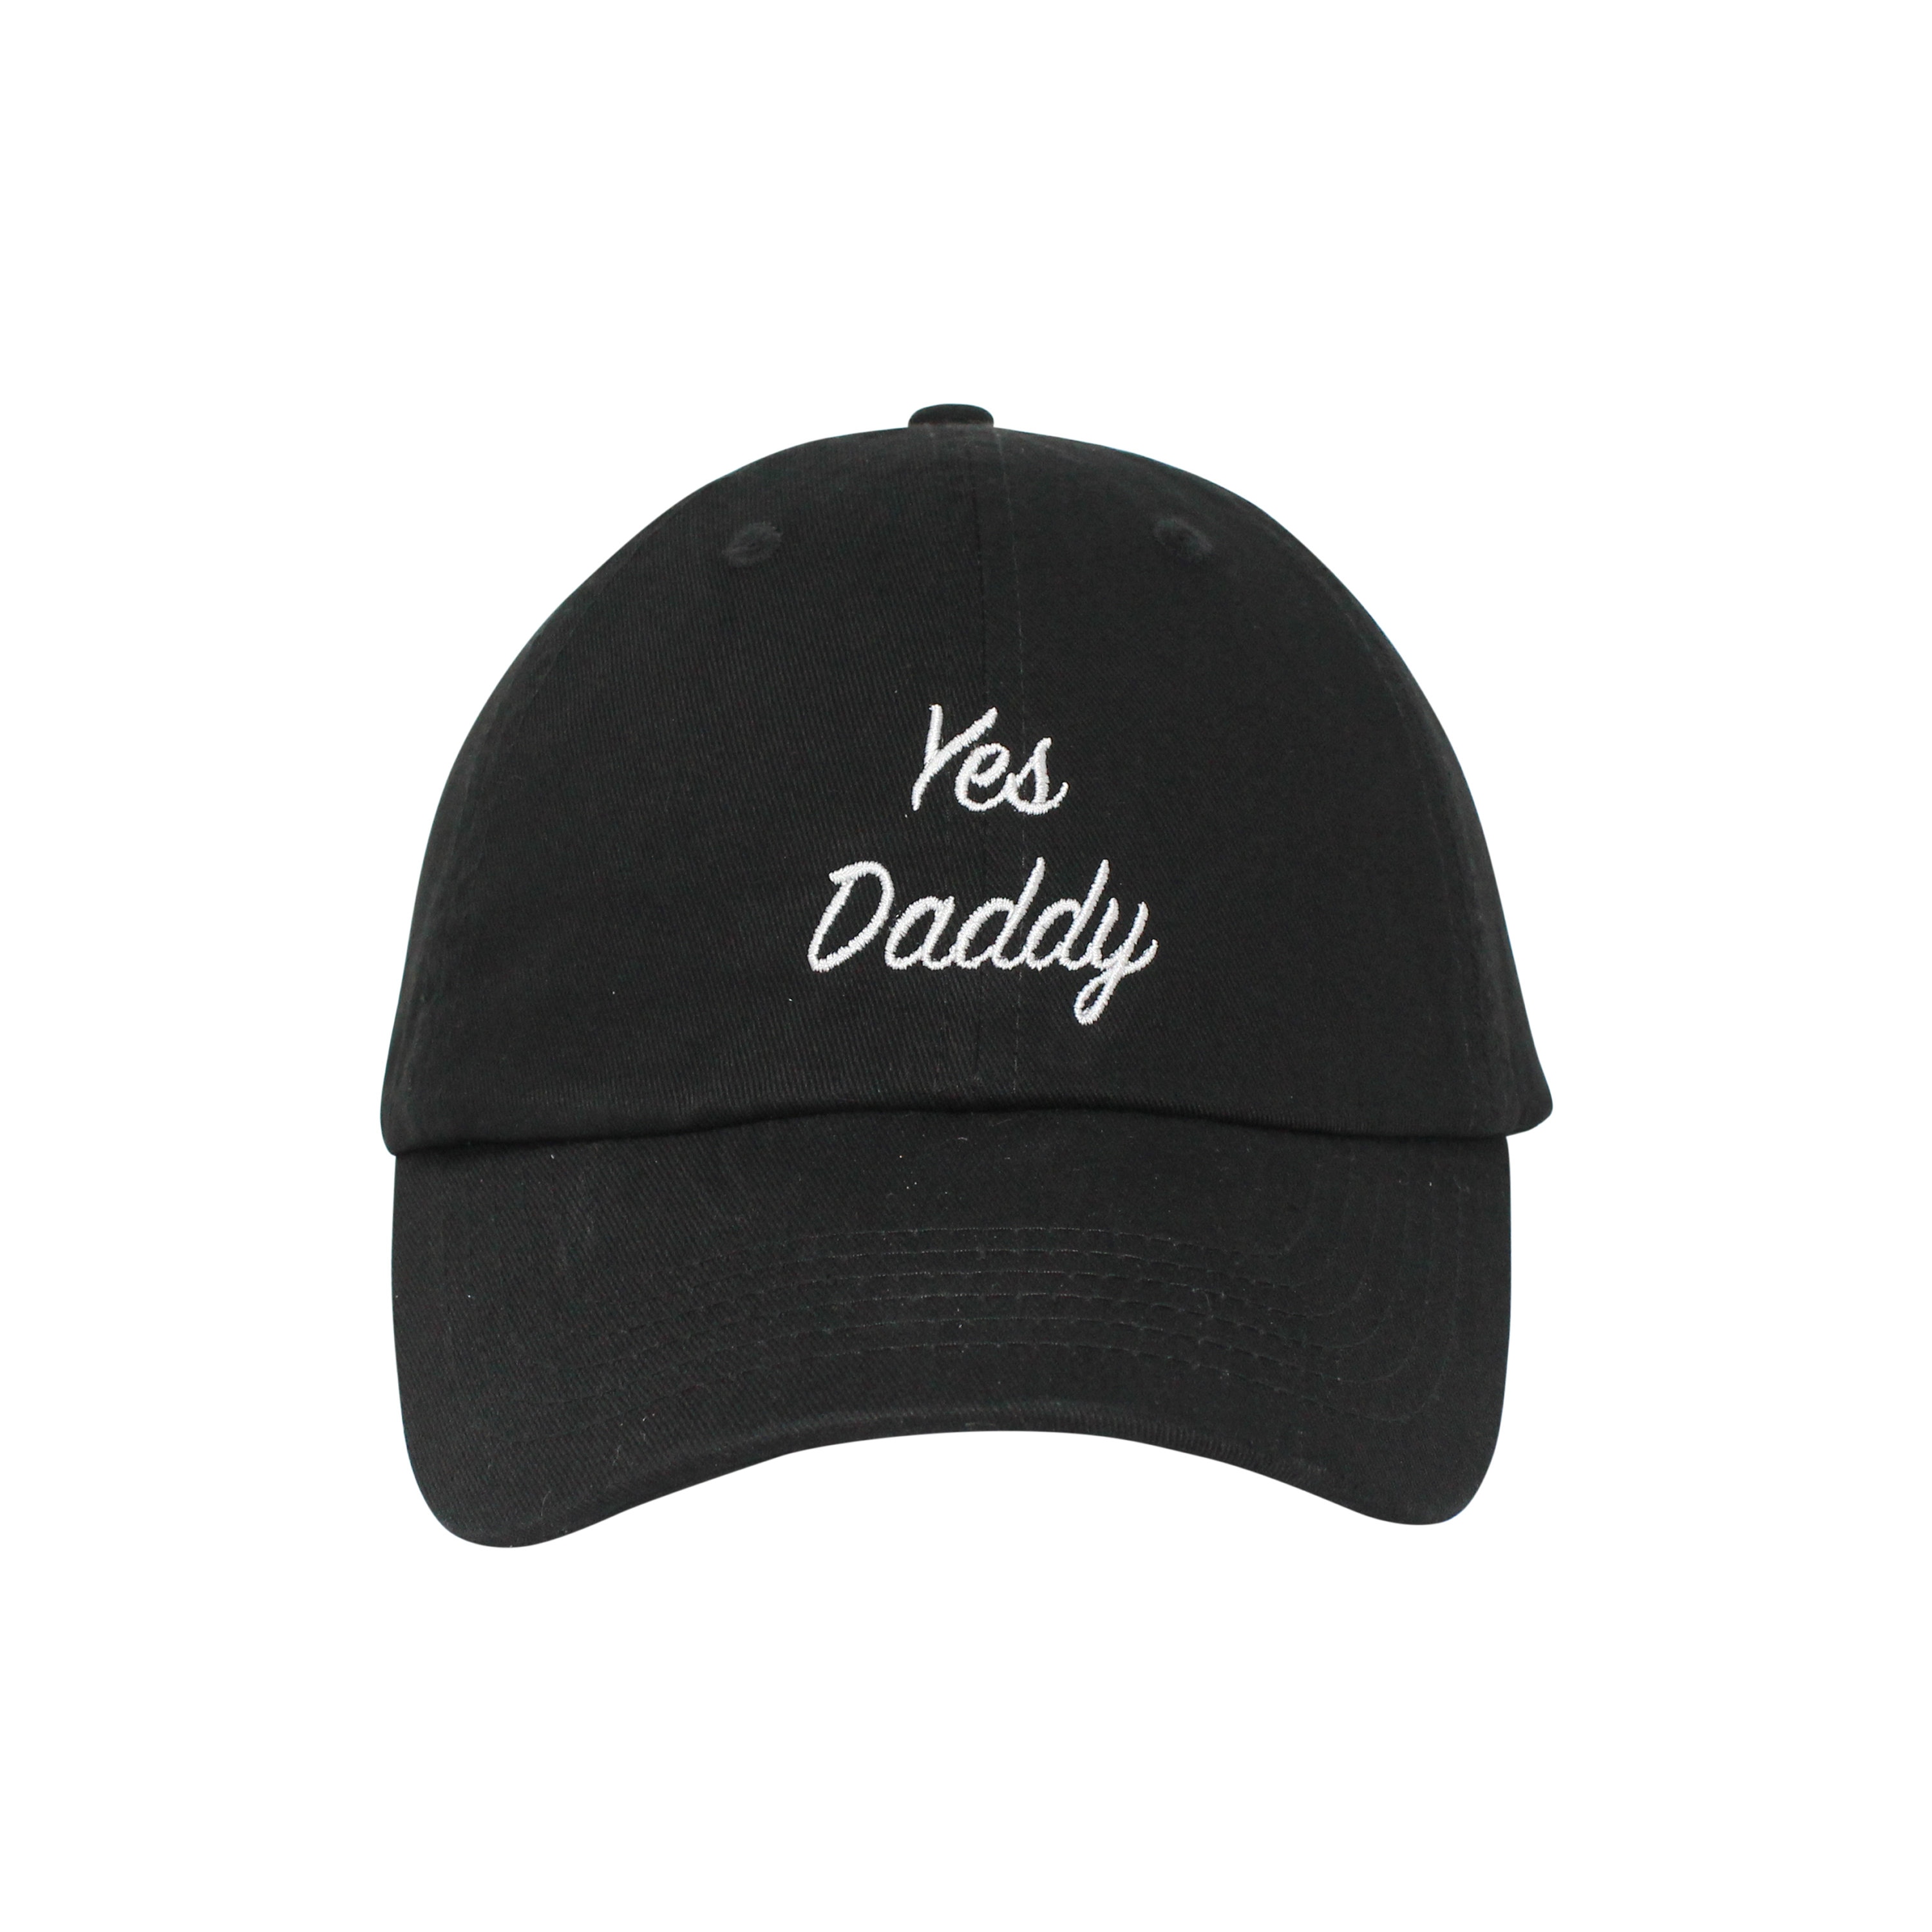 Yes Daddy Embroidered Cap Dad cap dad hat embroidered baseball | Etsy